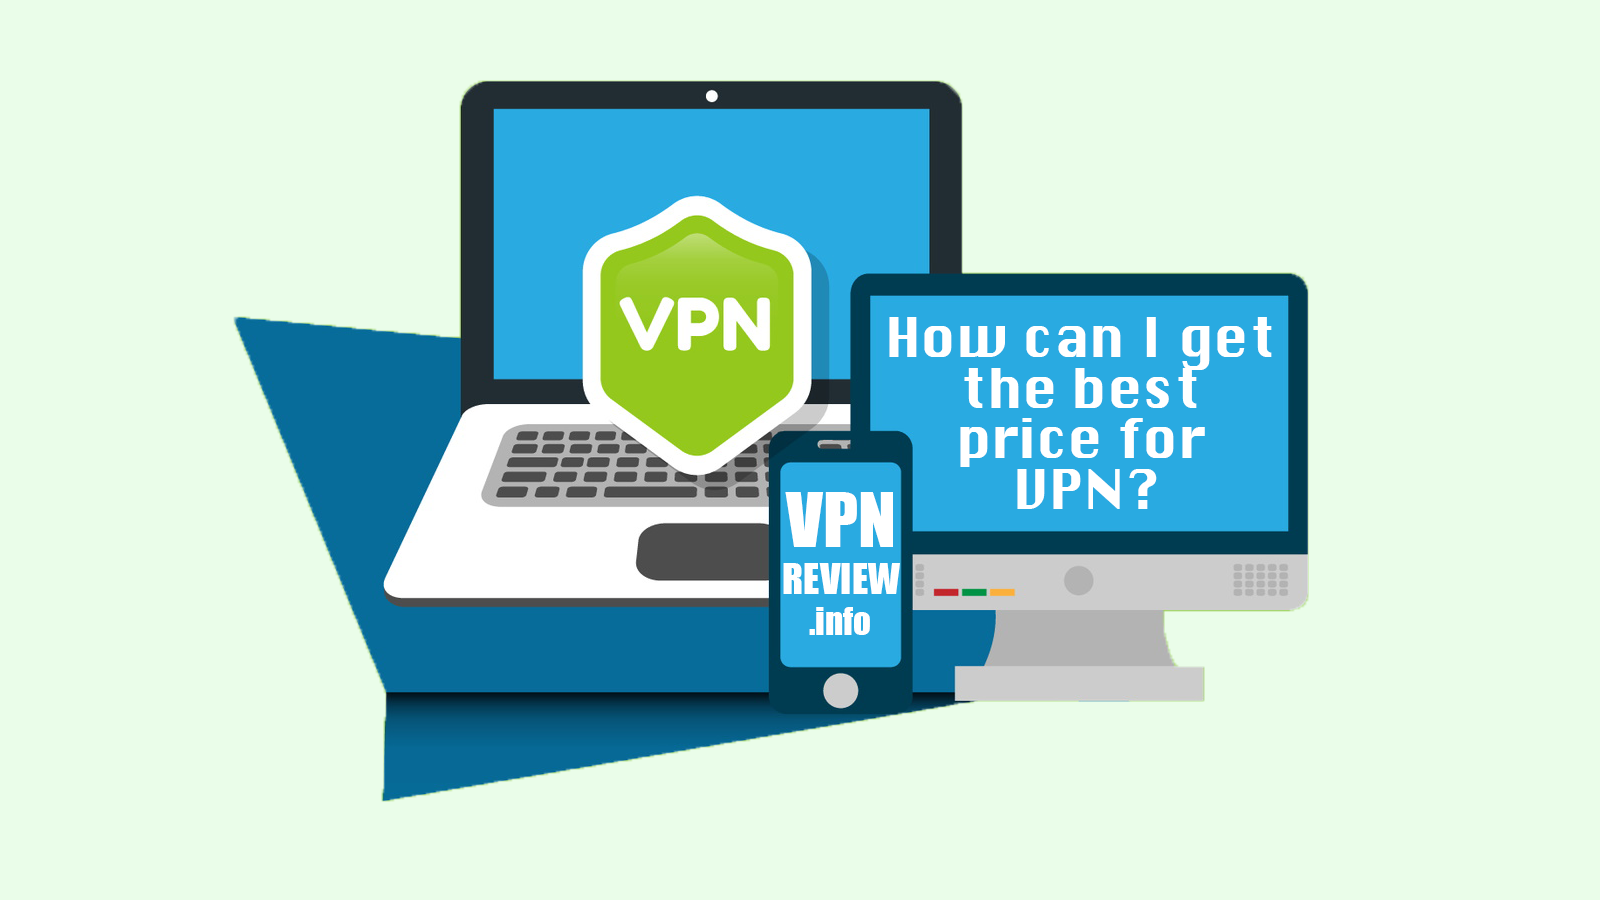 Navigating Discounts: How can I get the best price for VPN?